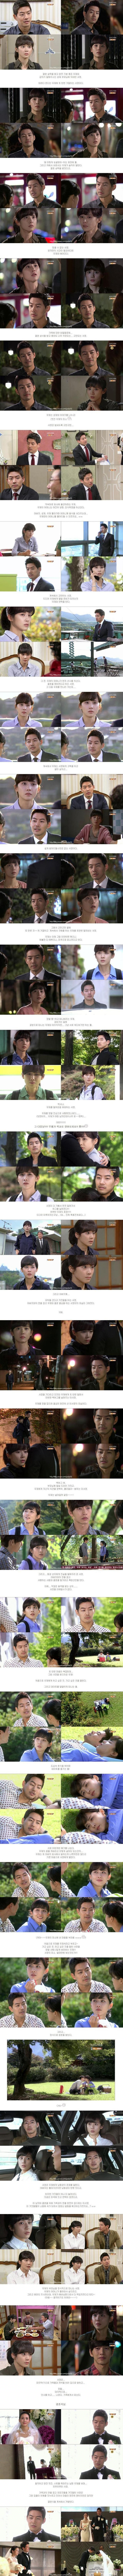 episode 9 and 10 captures for the Korean drama 'My Daughter Seo-yeong'